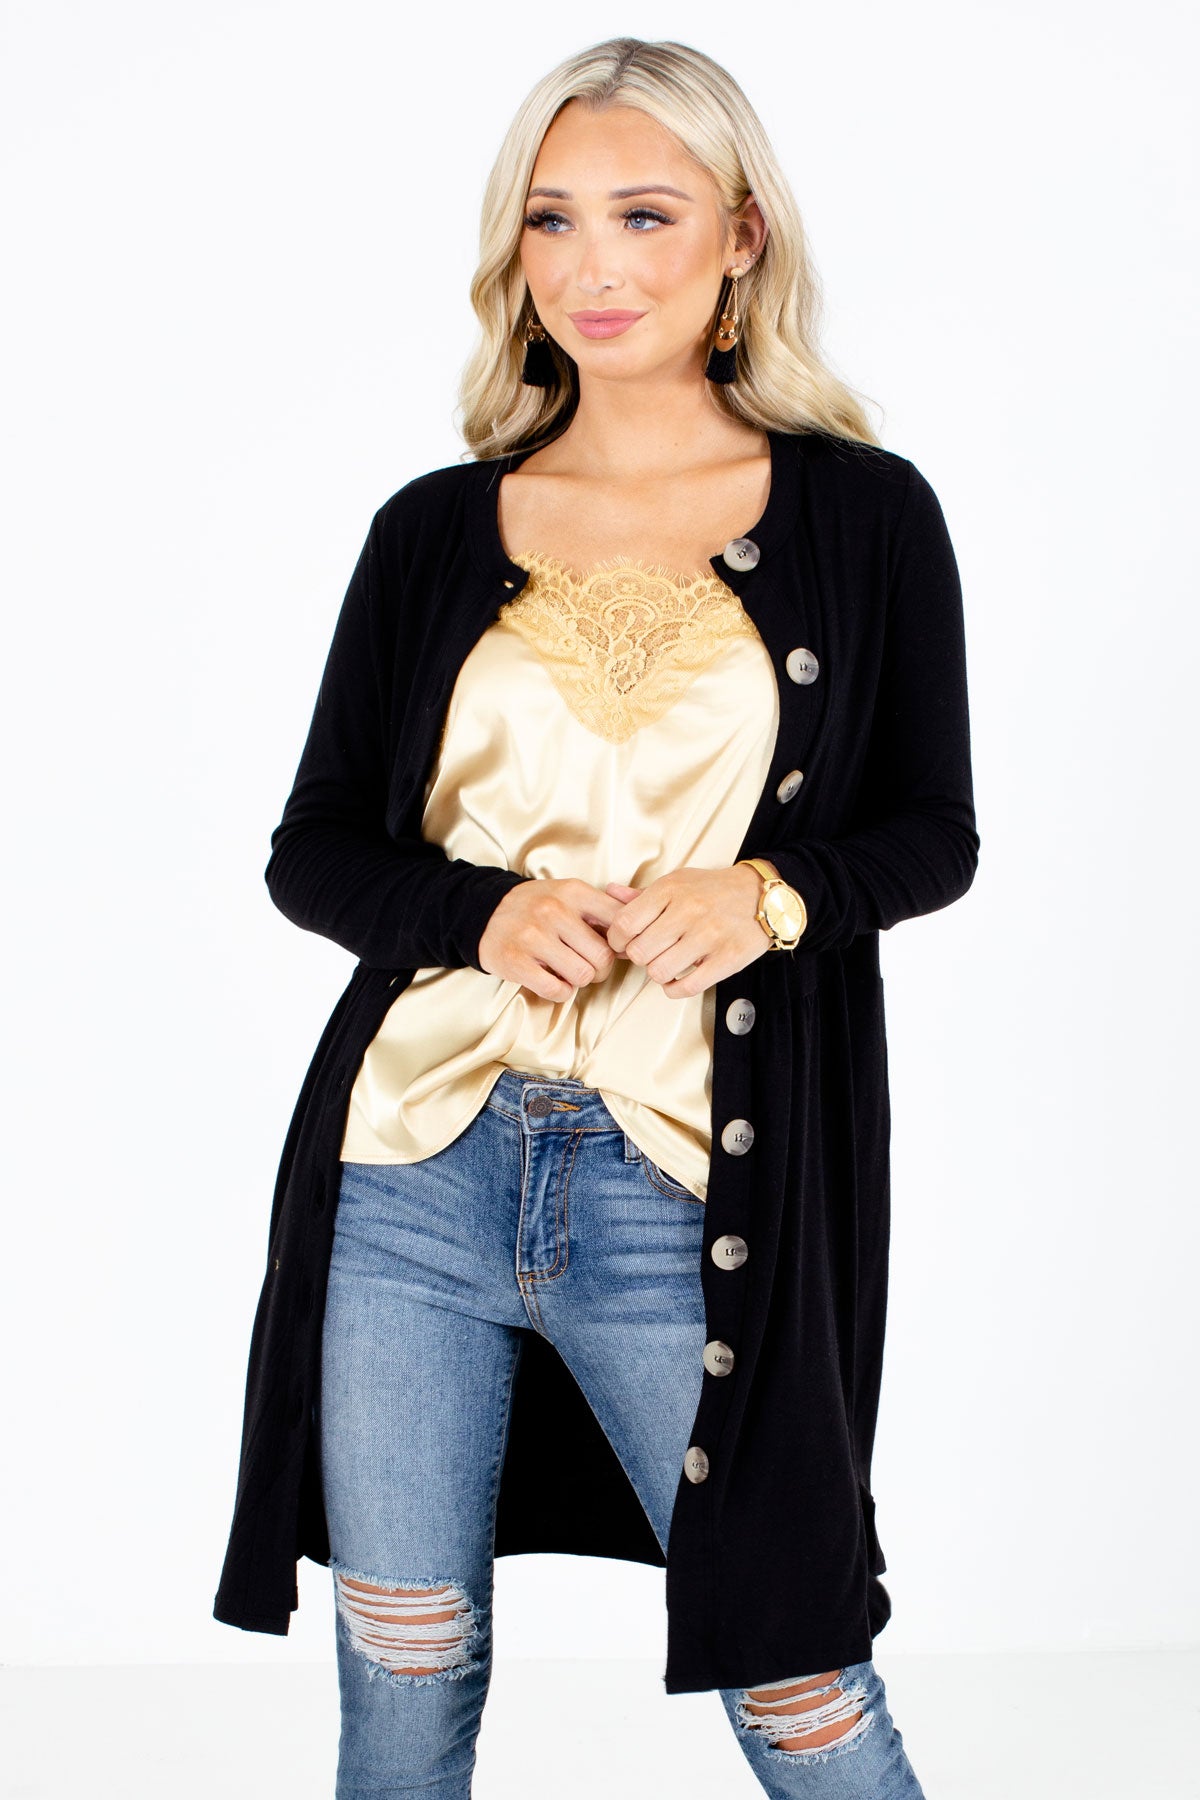 Black Boutique Cardigans with Pockets for Women